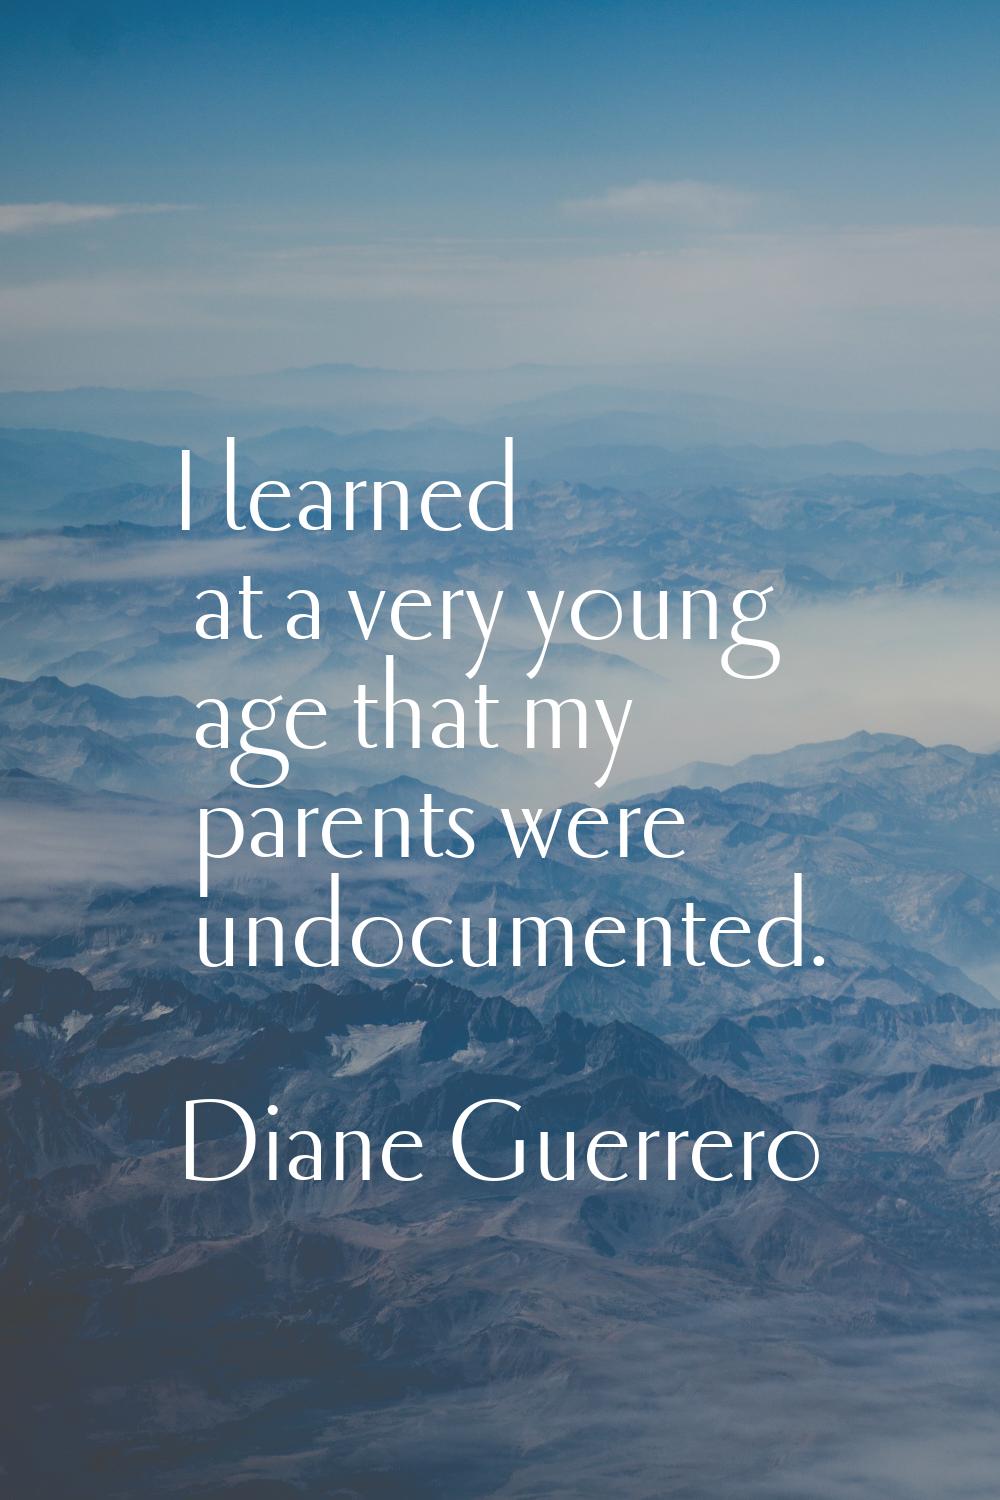 I learned at a very young age that my parents were undocumented.